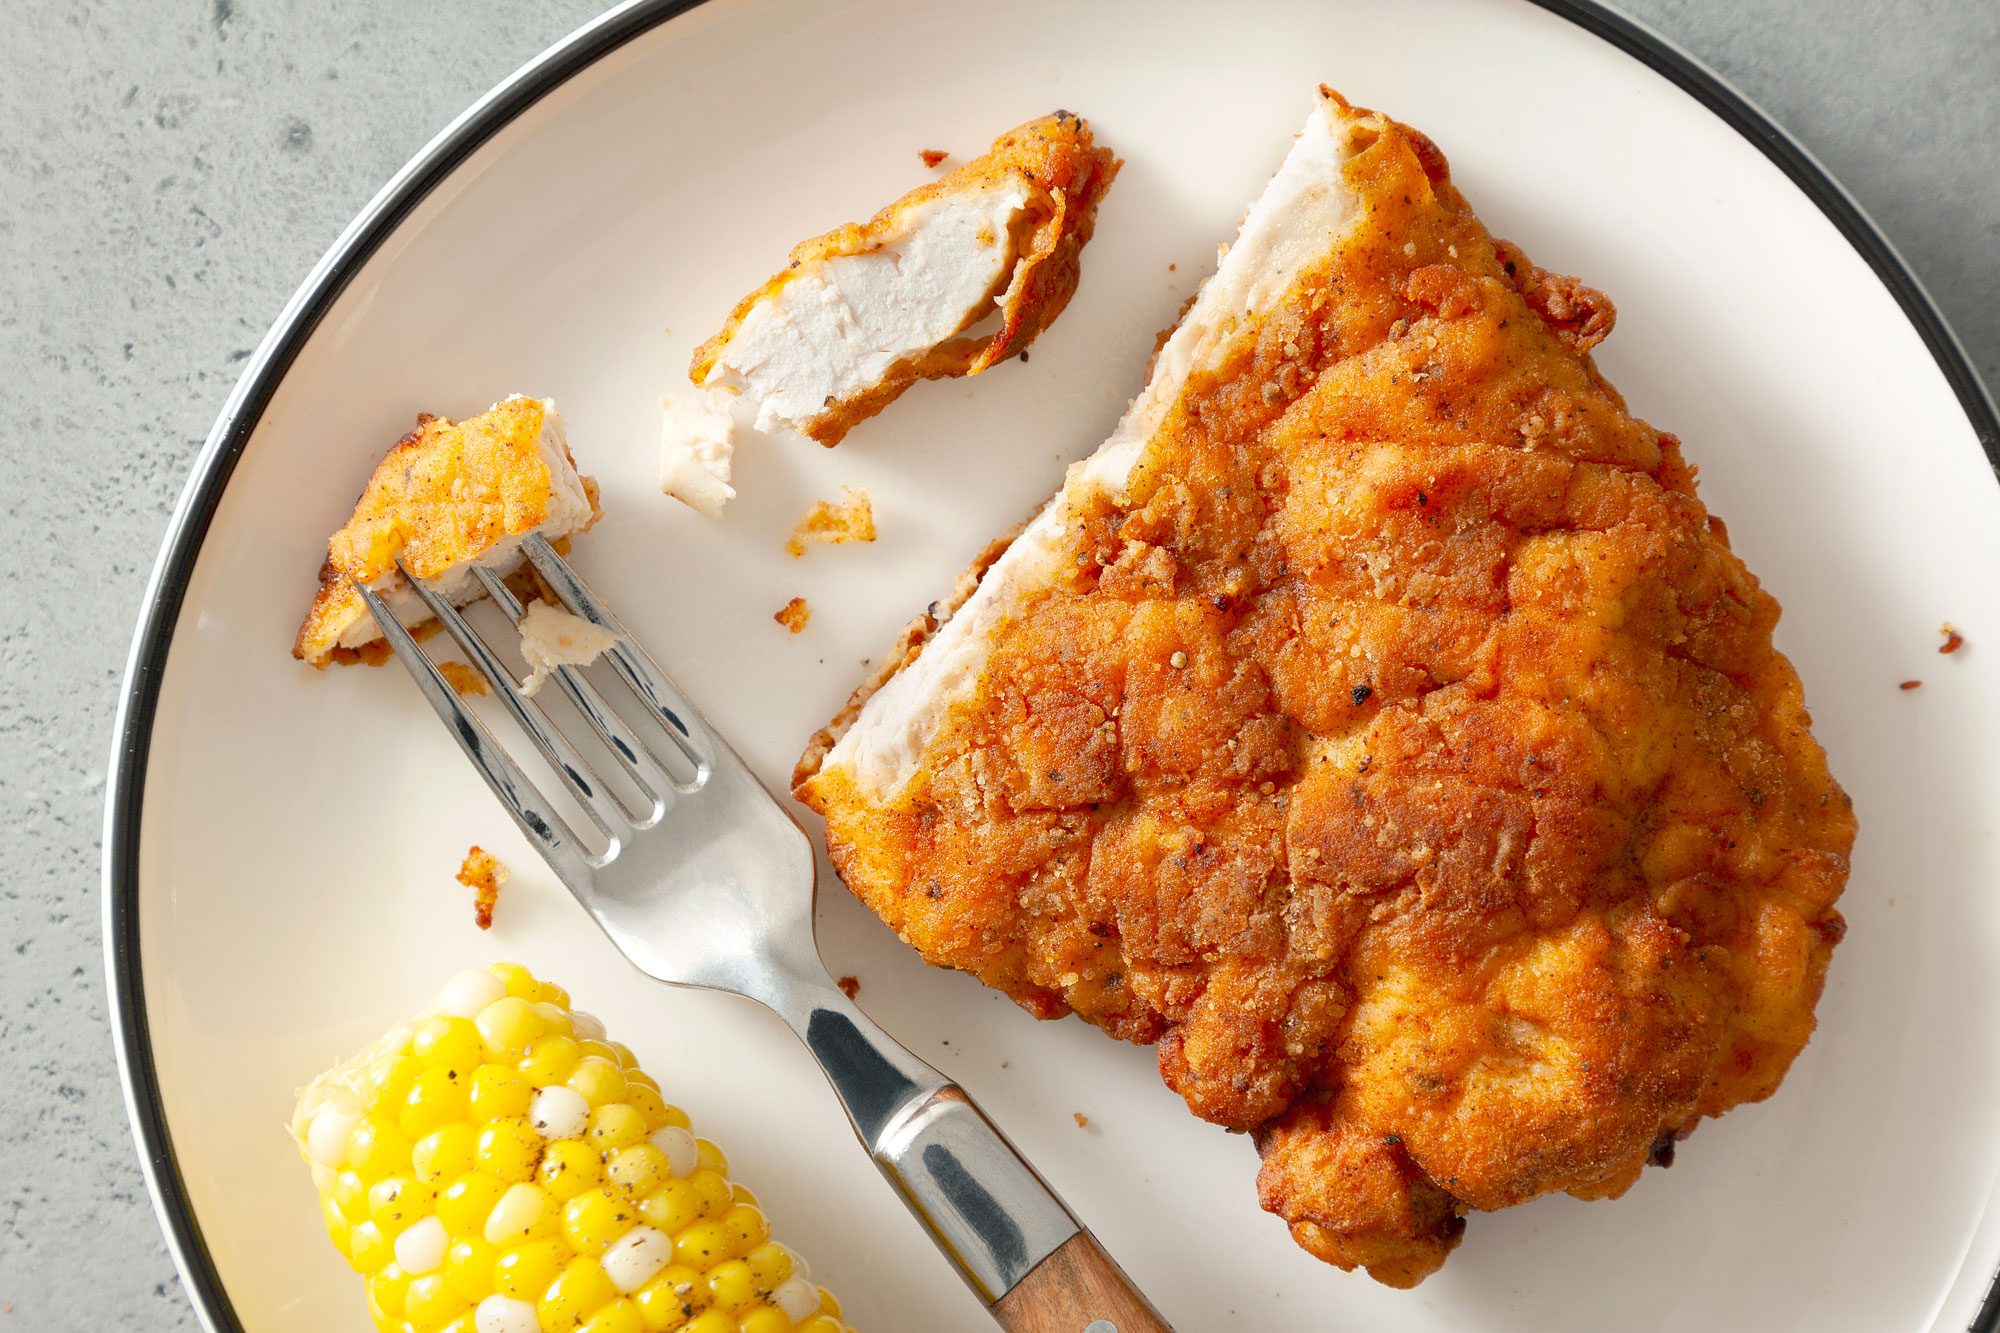 Crispy Fried Chicken Breasts Served with Boiled Corn on a Small Plate on a Grey Surface